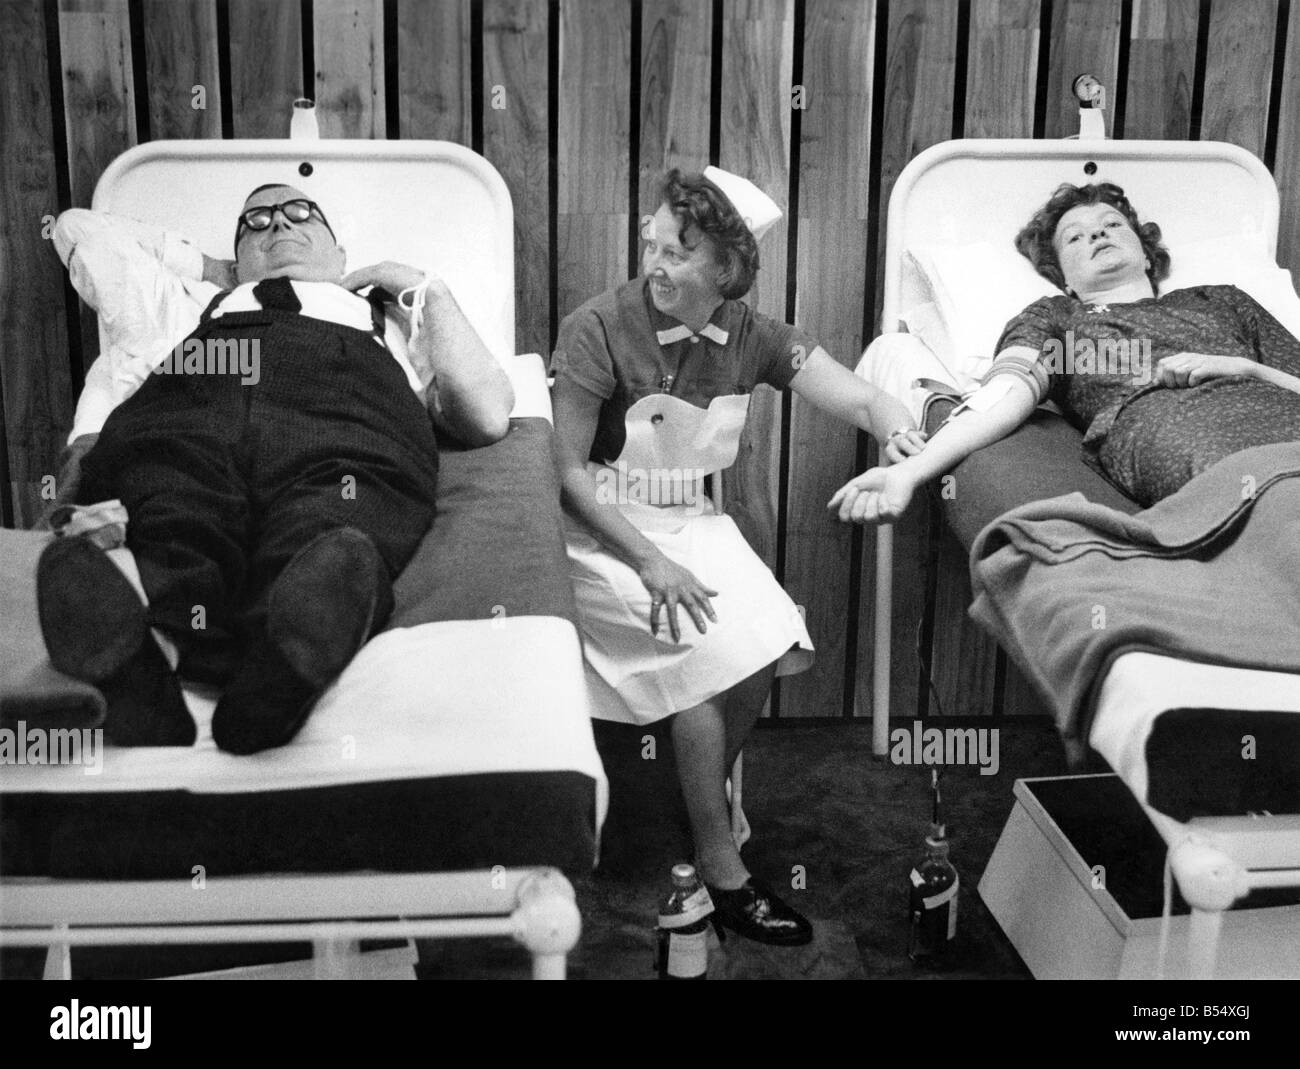 Blood Donors. Mr. Sydney Spencer (59) of Thursby Rd., Burnley and Mrs Ann Piper (25) of Paddock Lane, Kettle Shumle, Whalley Bridge, donating blood at the Blood Bank, Manchester, after they had received an urgent request from Denmark. P011350 Stock Photo